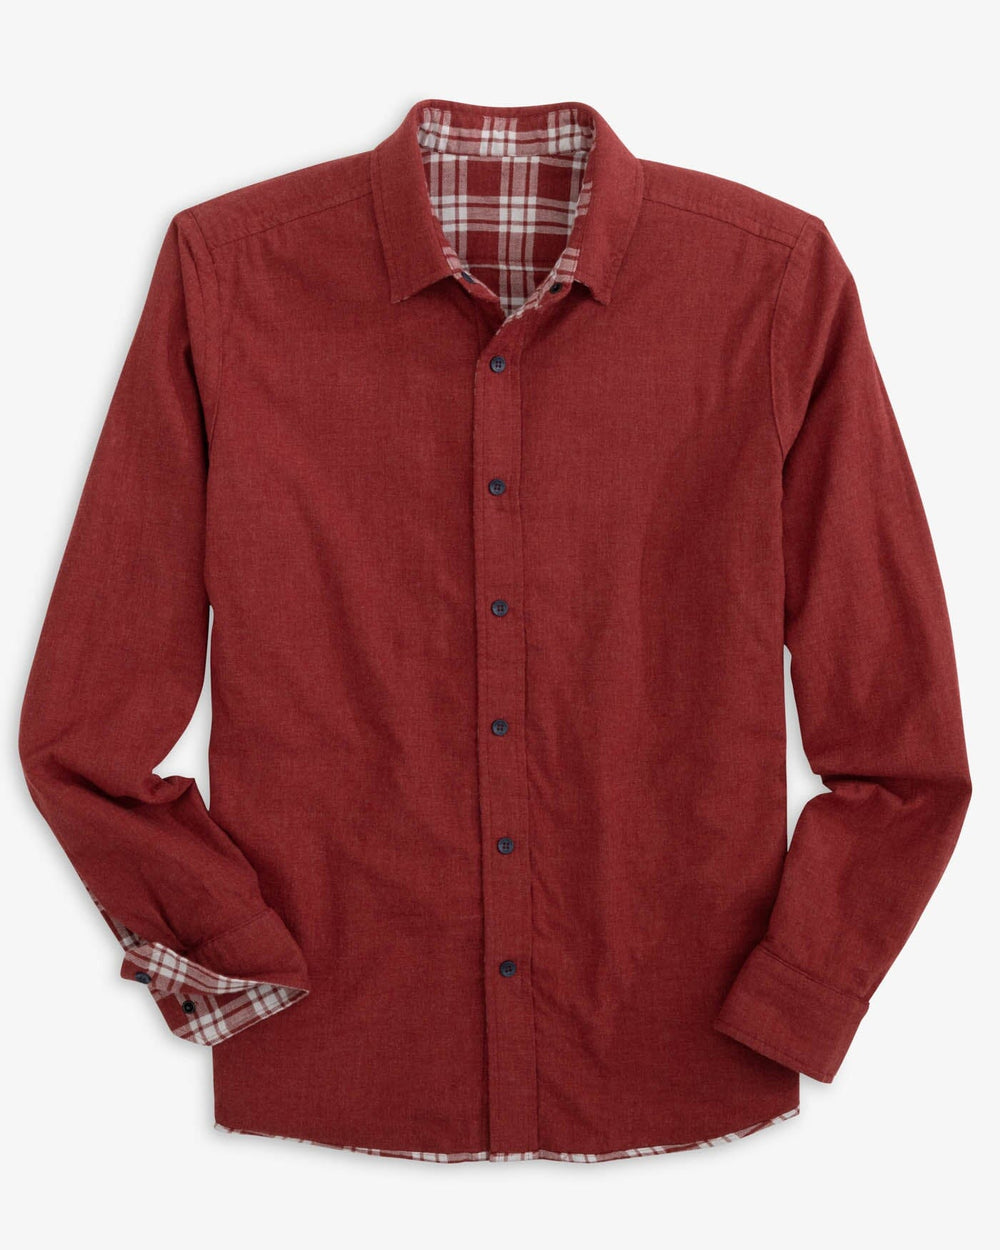 The reverse view of the Southern Tide Heather Melbourne Reversible Plaid Sport Shirt by Southern Tide - Heather Tuscany Red